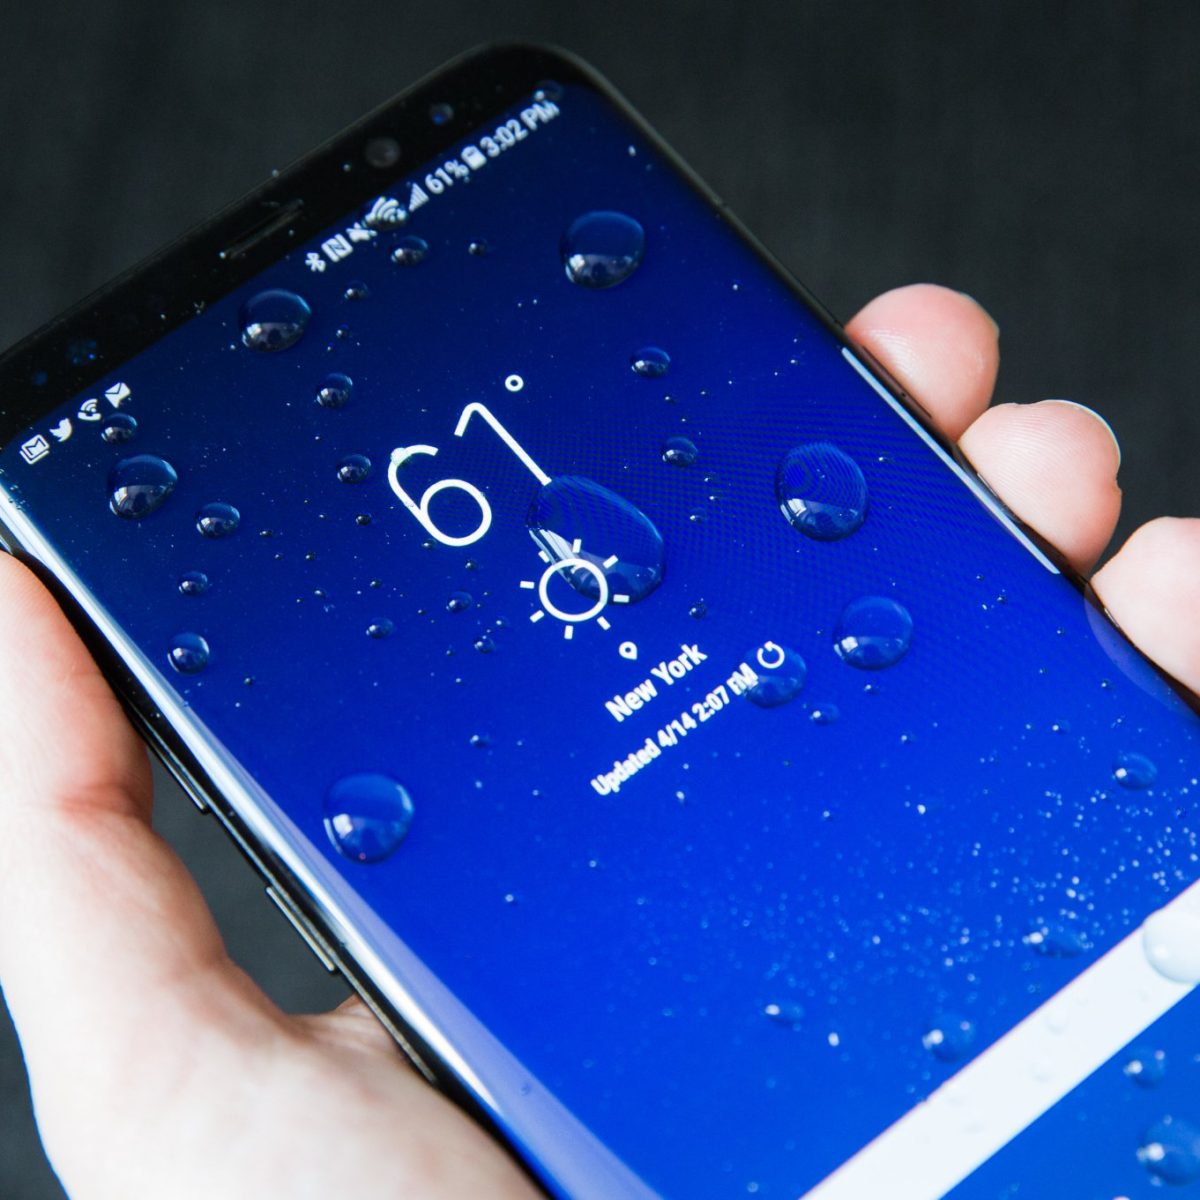 Umidigi's S2 Pro Offers Galaxy S8 Design For Less Than Half the